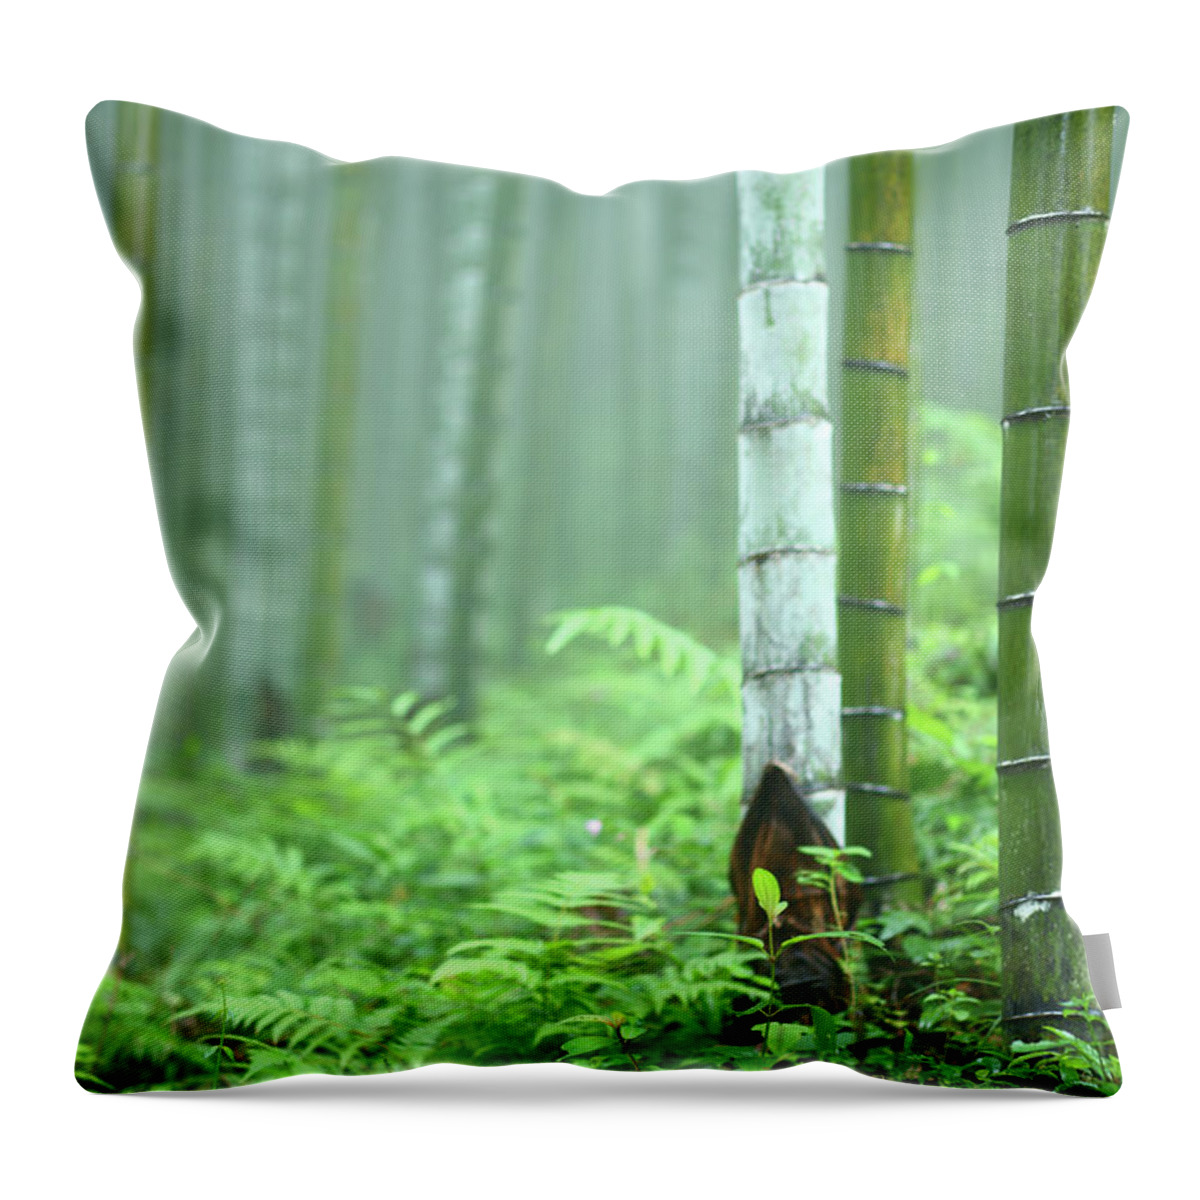 Environmental Conservation Throw Pillow featuring the photograph Bamboo Grove #3 by Bihaibo